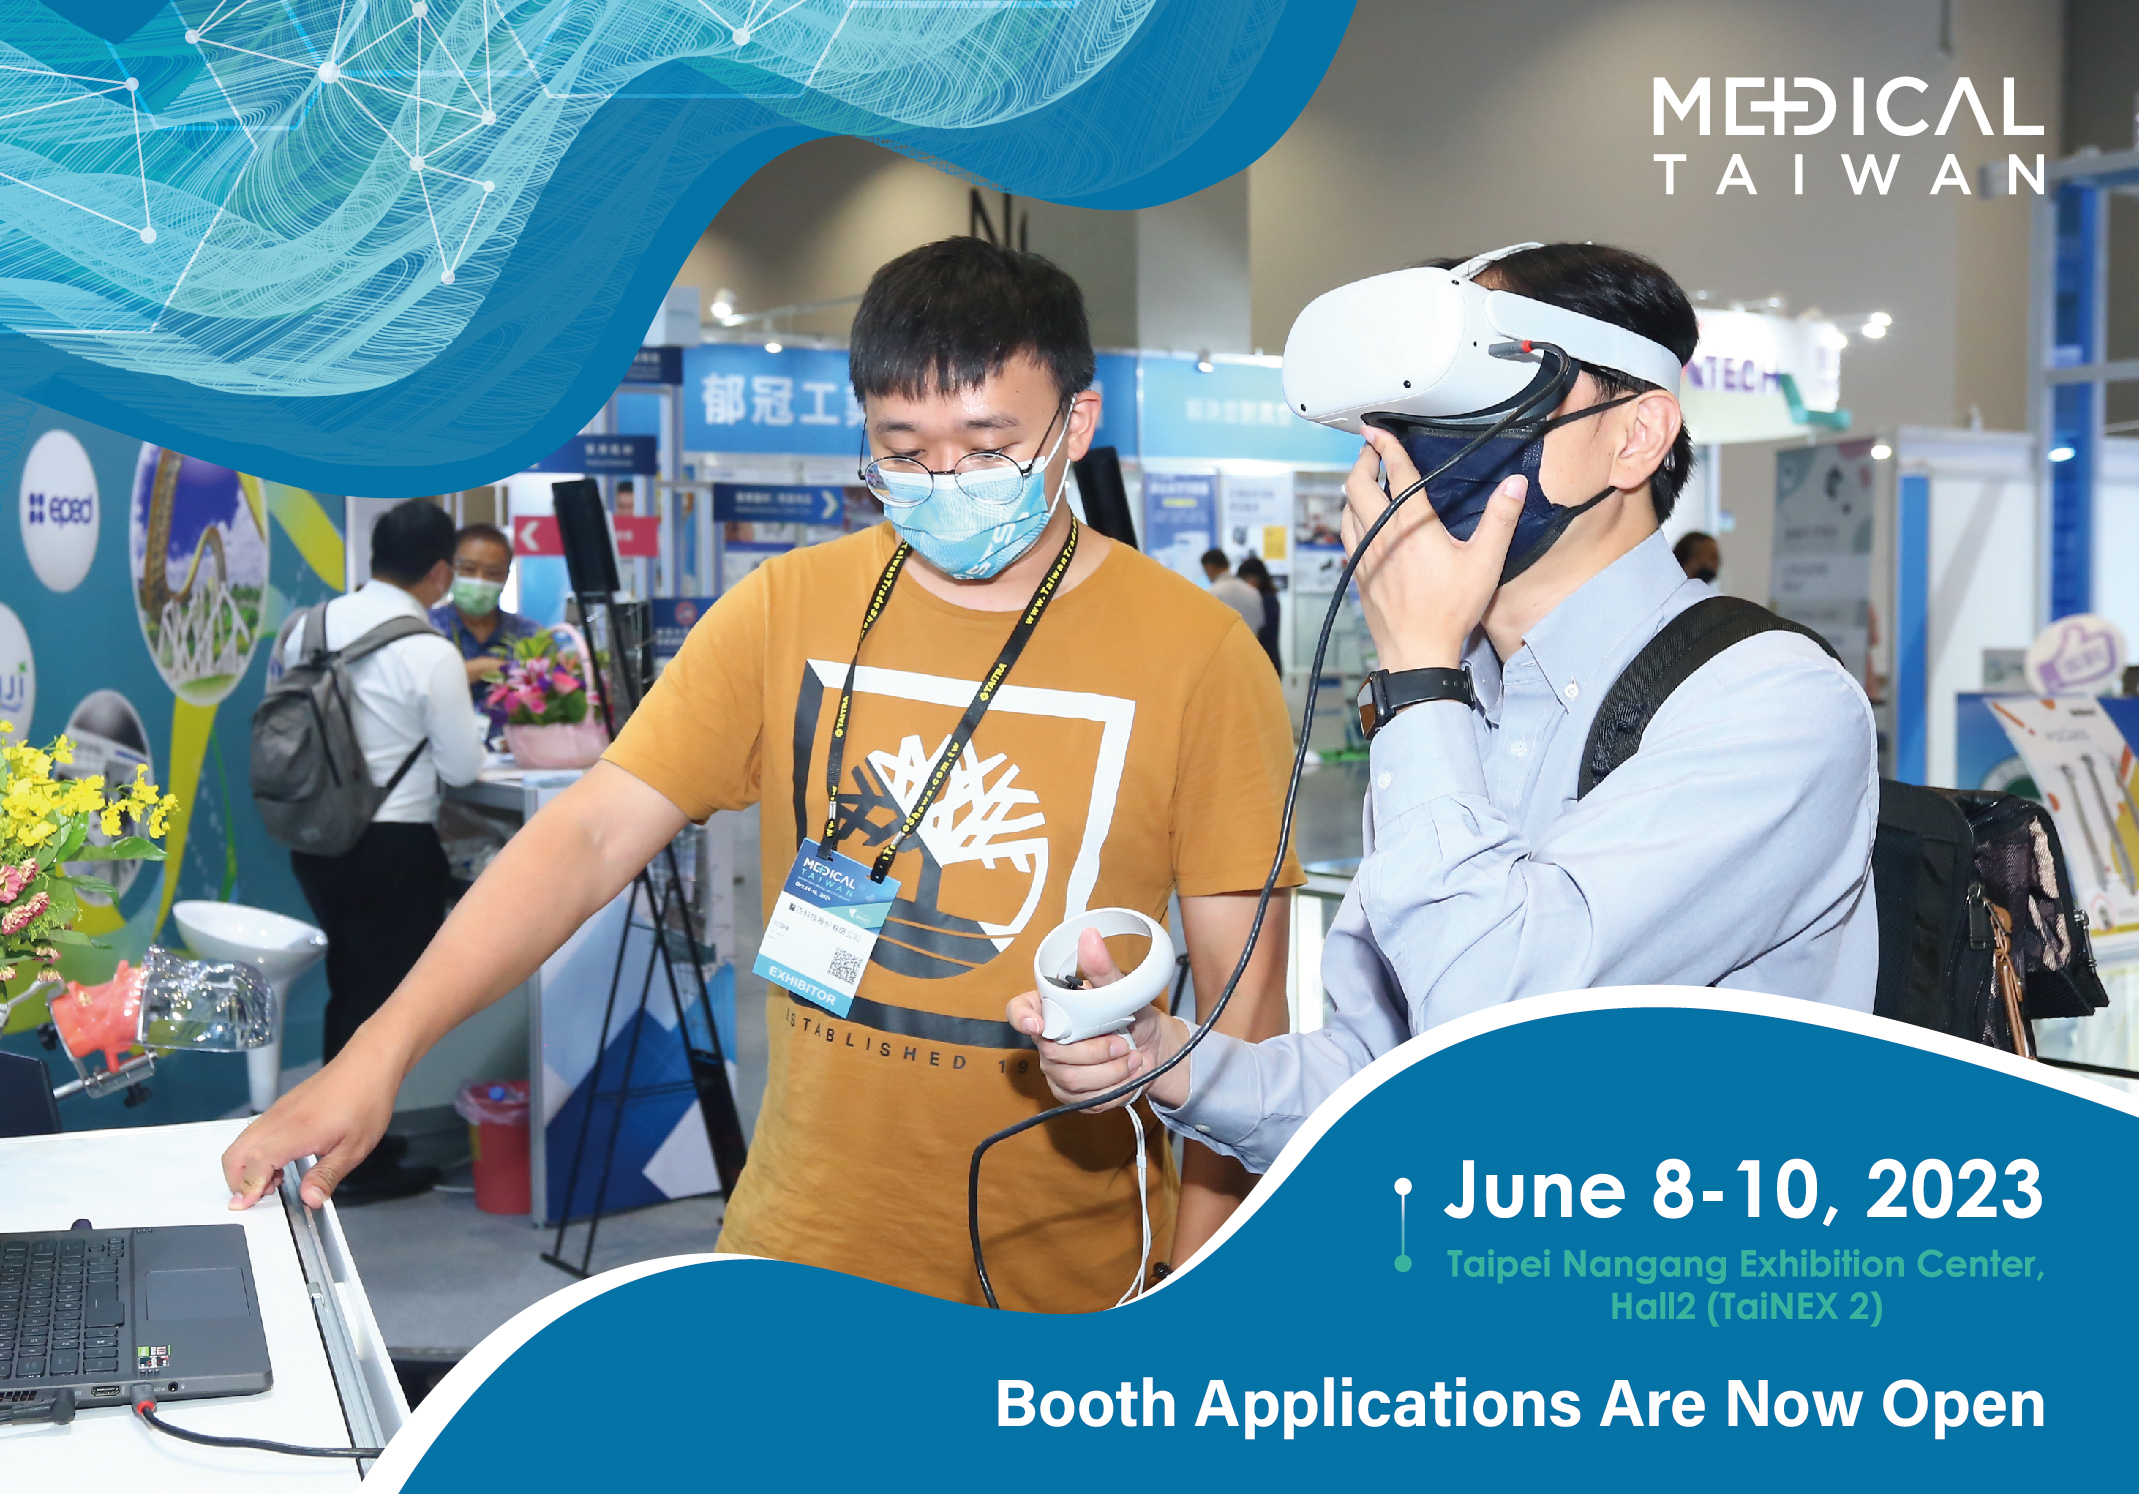 Booth Applications for Medical Taiwan 2023 Are Now Open